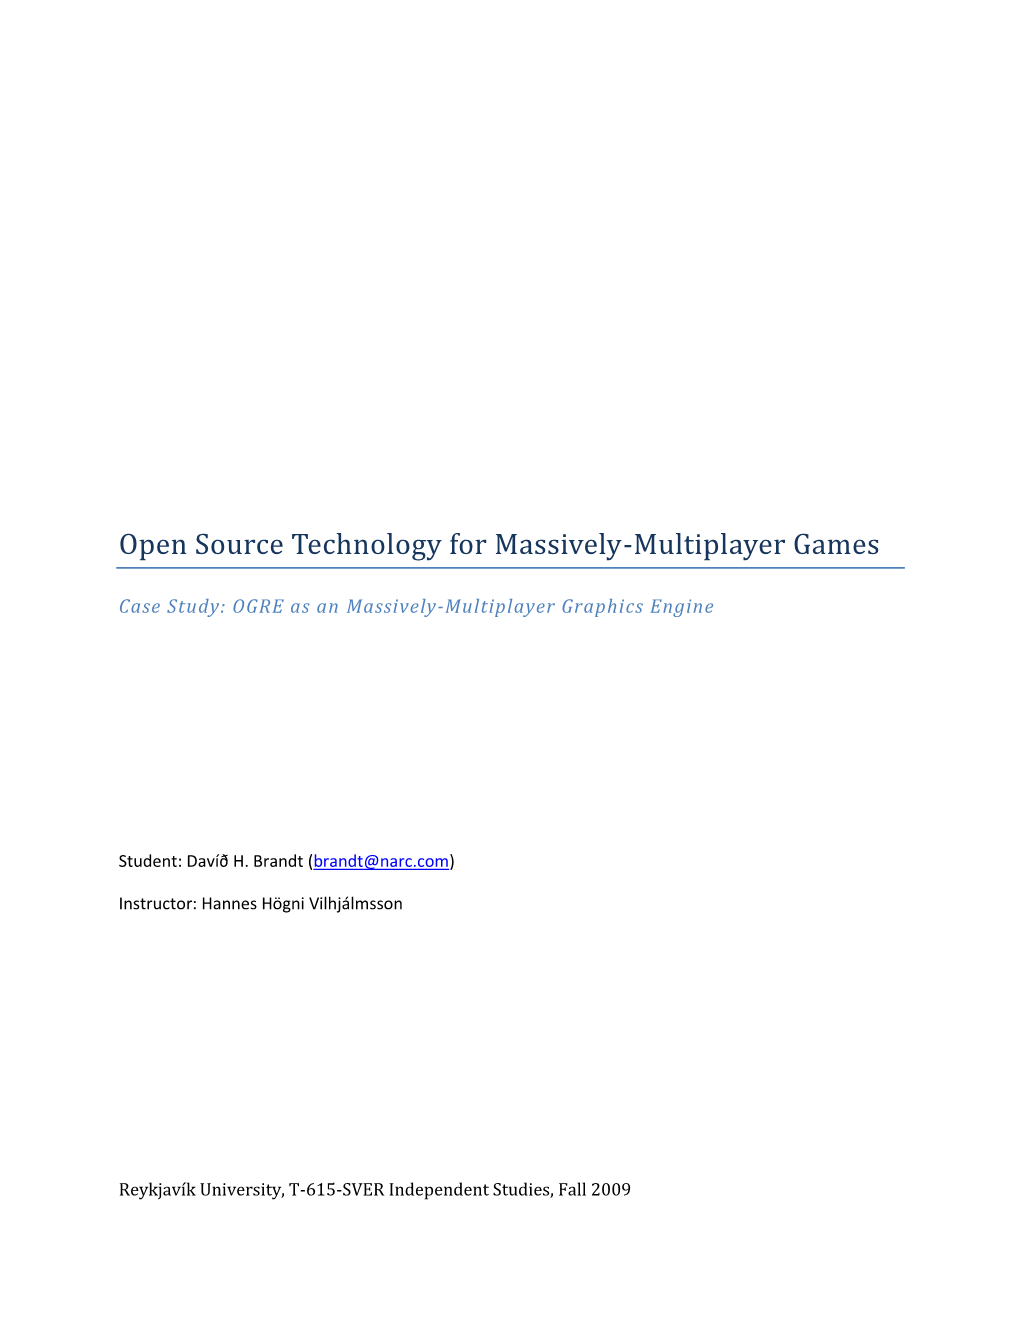 Open Source Technology for Massively-Multiplayer Games